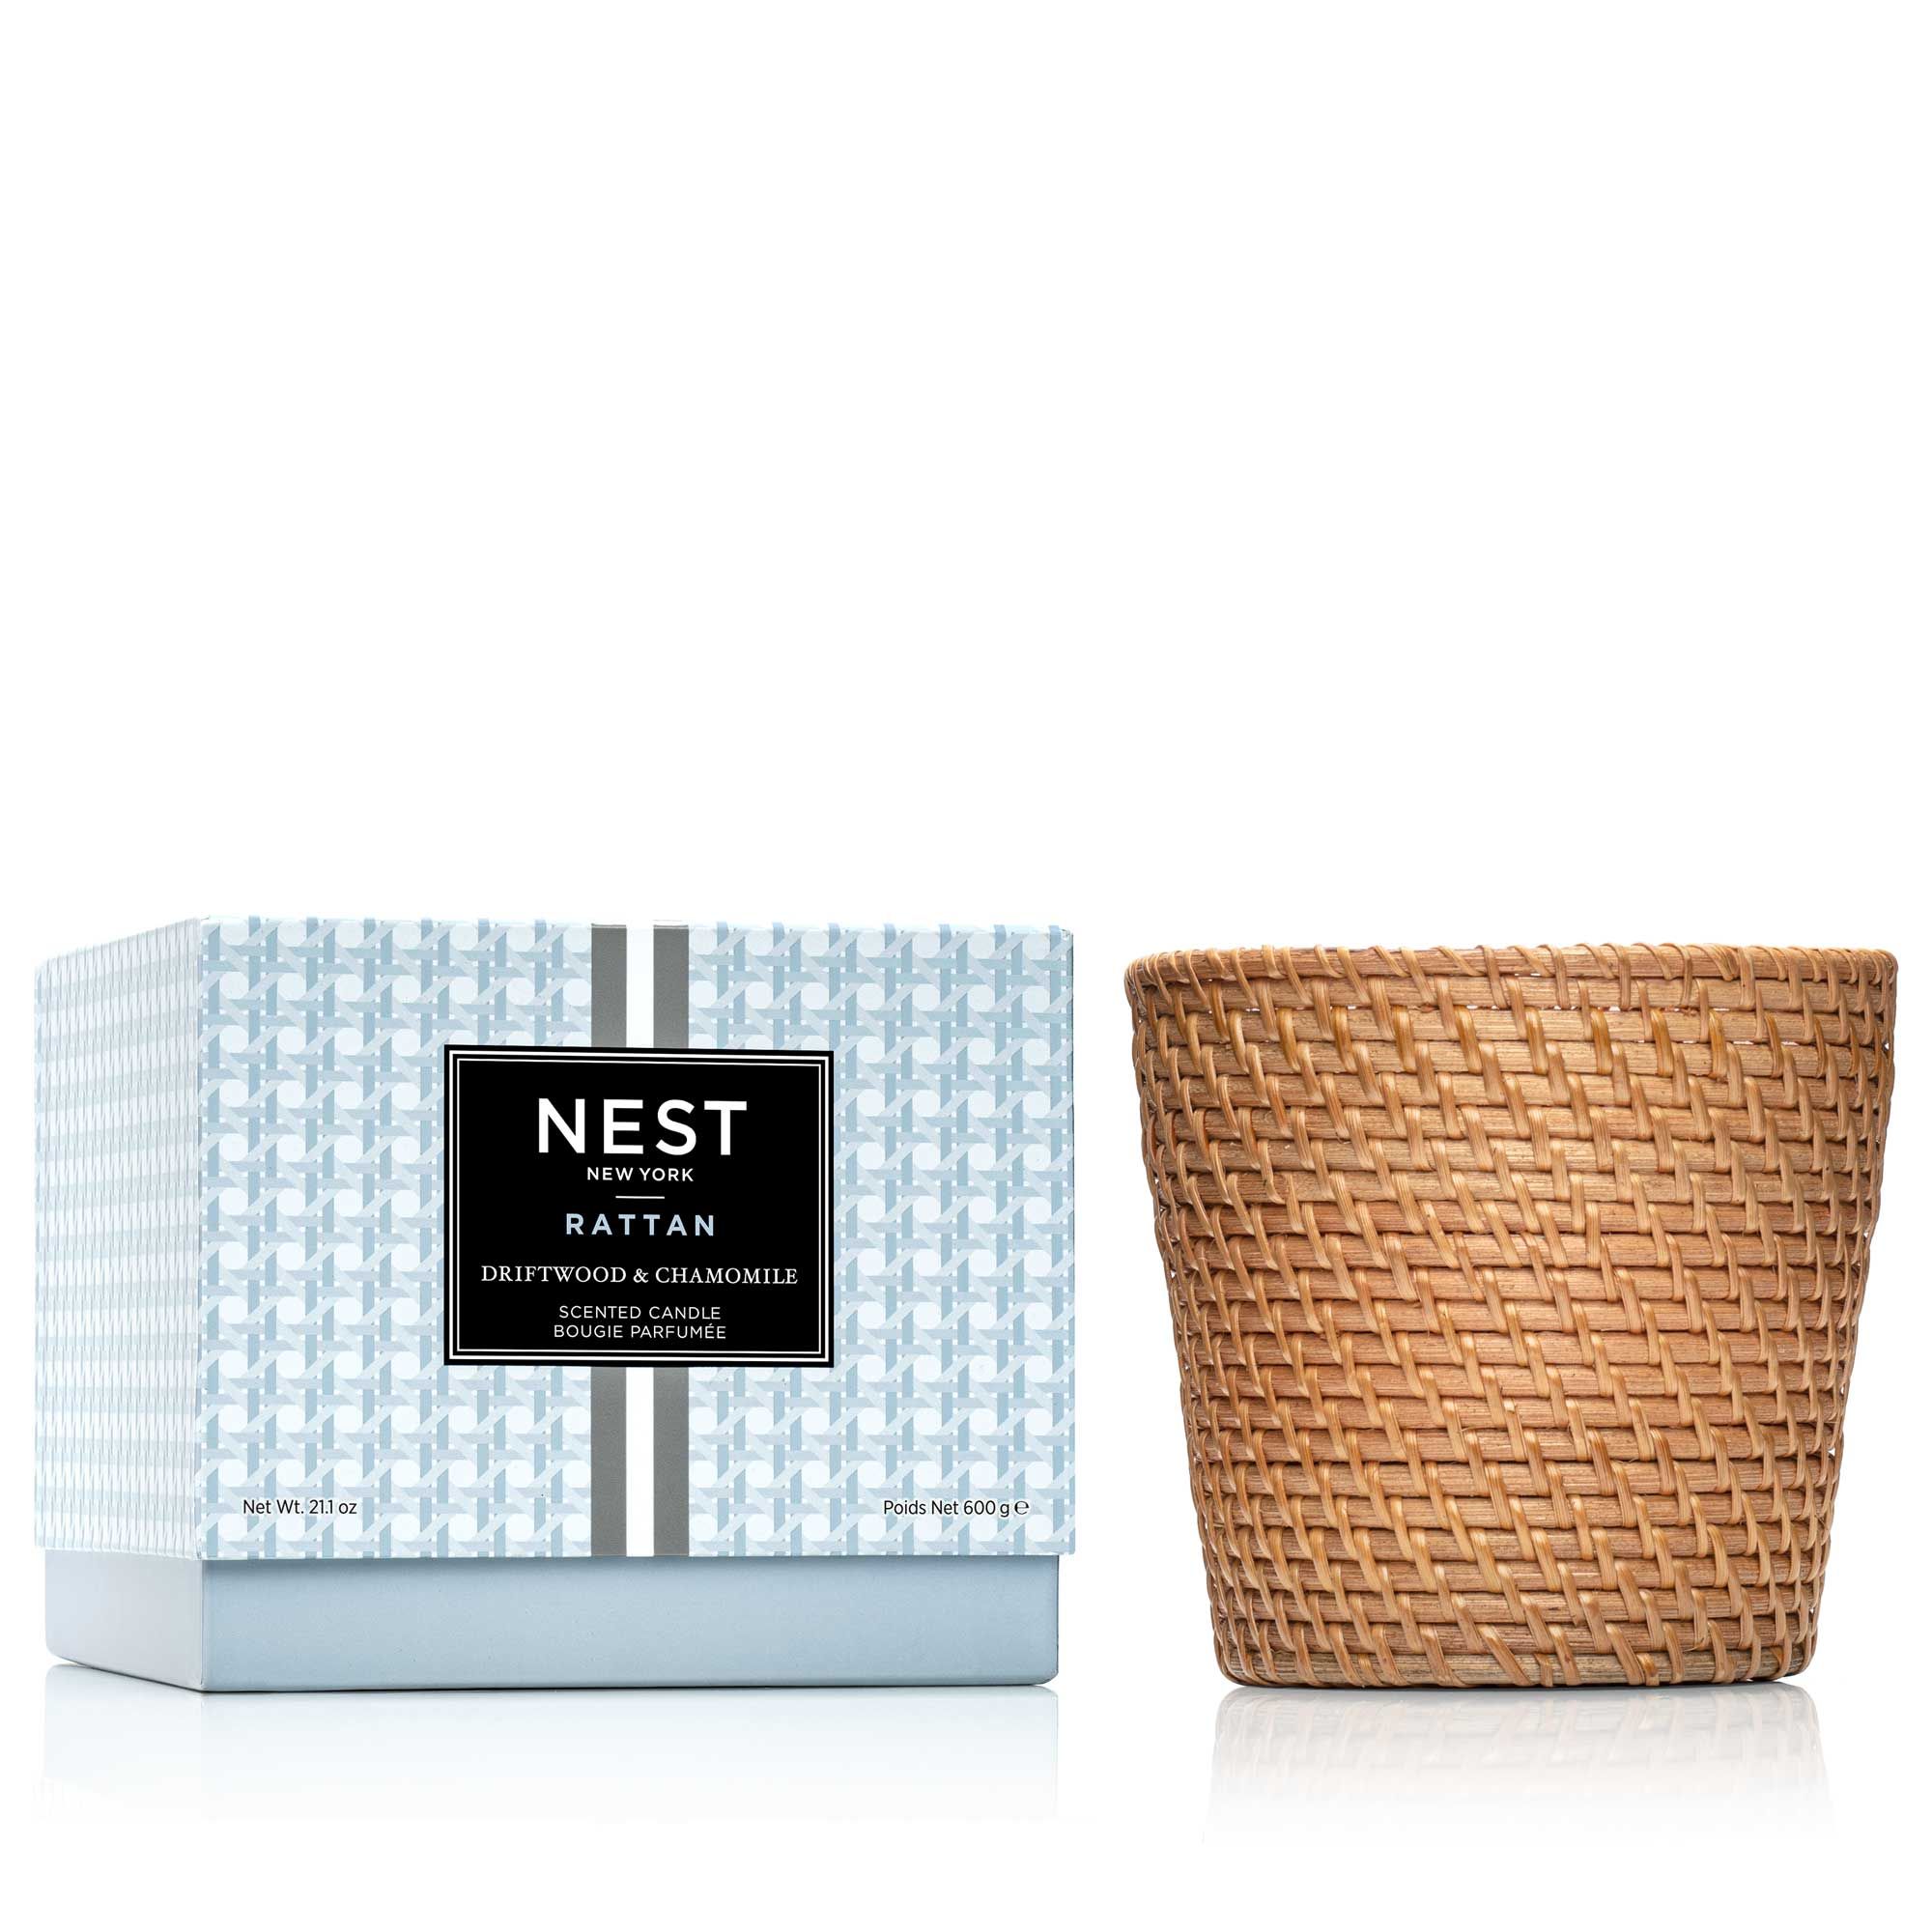 Rattan Driftwood & Chamomile 3-Wick Candle | NEST Fragrances